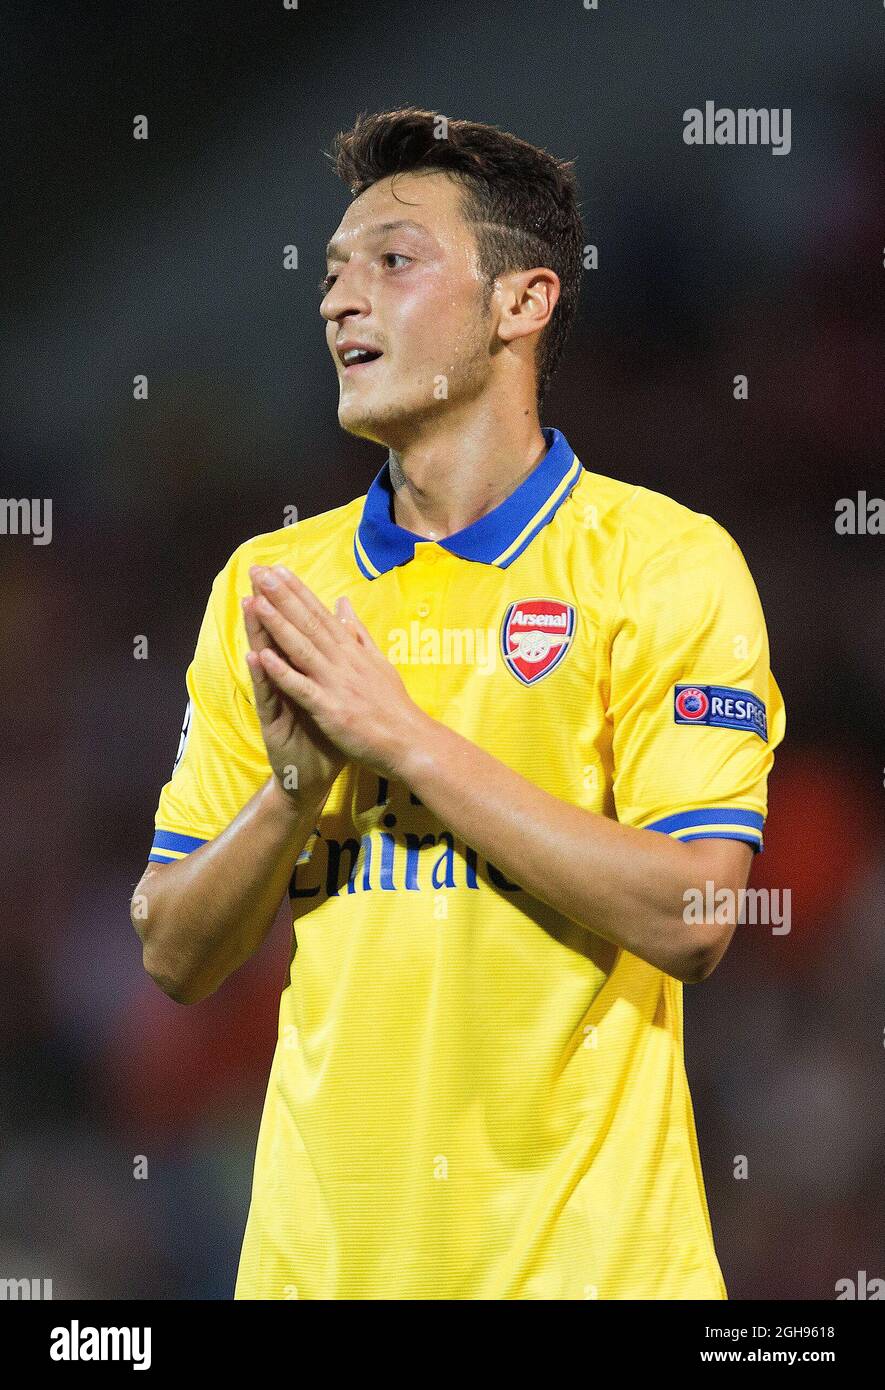 Arsenal's Mesut Ozil reacts during the UEFA Champions&#8217; League Group F match between Olympique de Marseille and Arsenal FC at Stade Velodrome Stadium in Marseille, France, on Sept. 18, 2013. Stock Photo